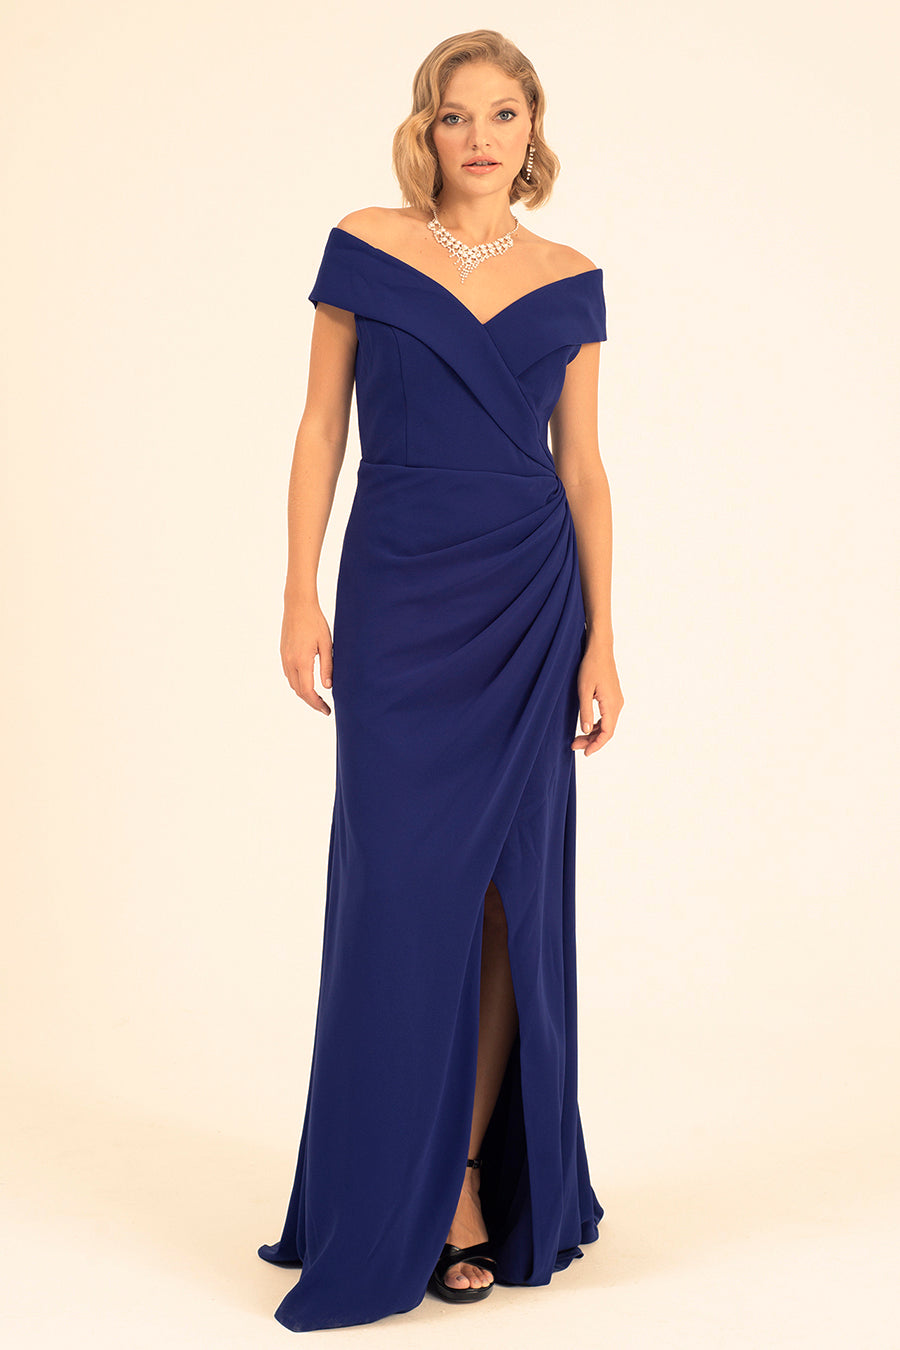 Riley - Mystic Evenings | Evening and Prom Dresses